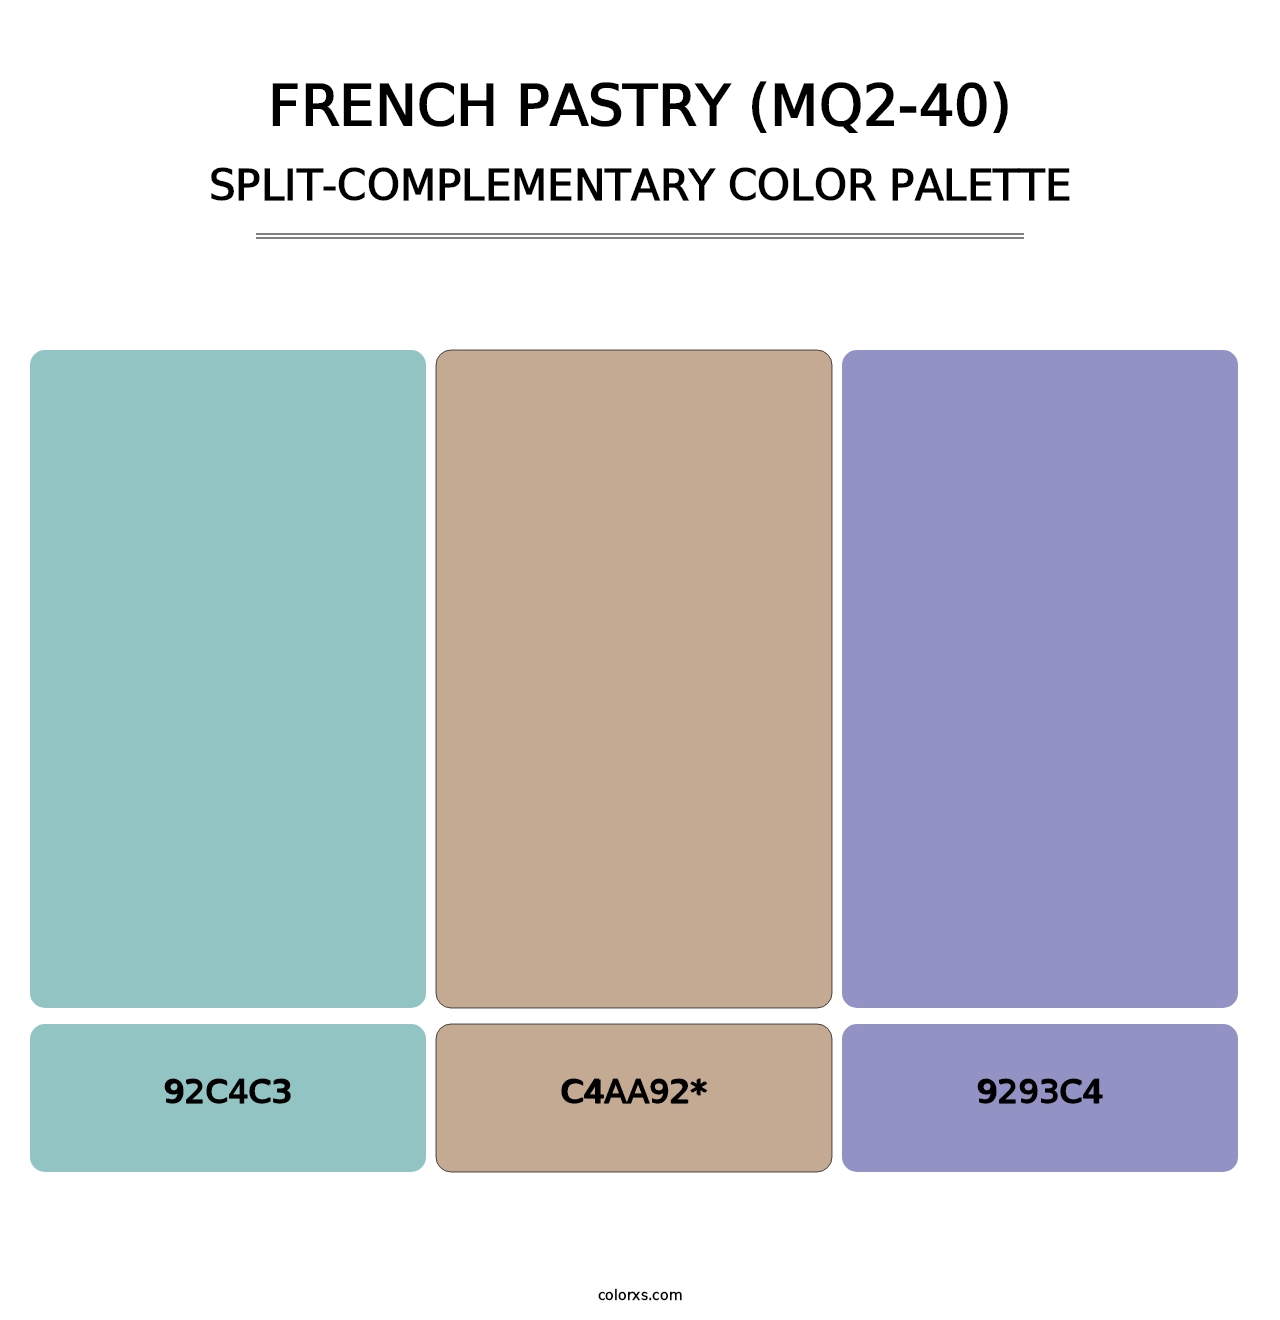 French Pastry (MQ2-40) - Split-Complementary Color Palette